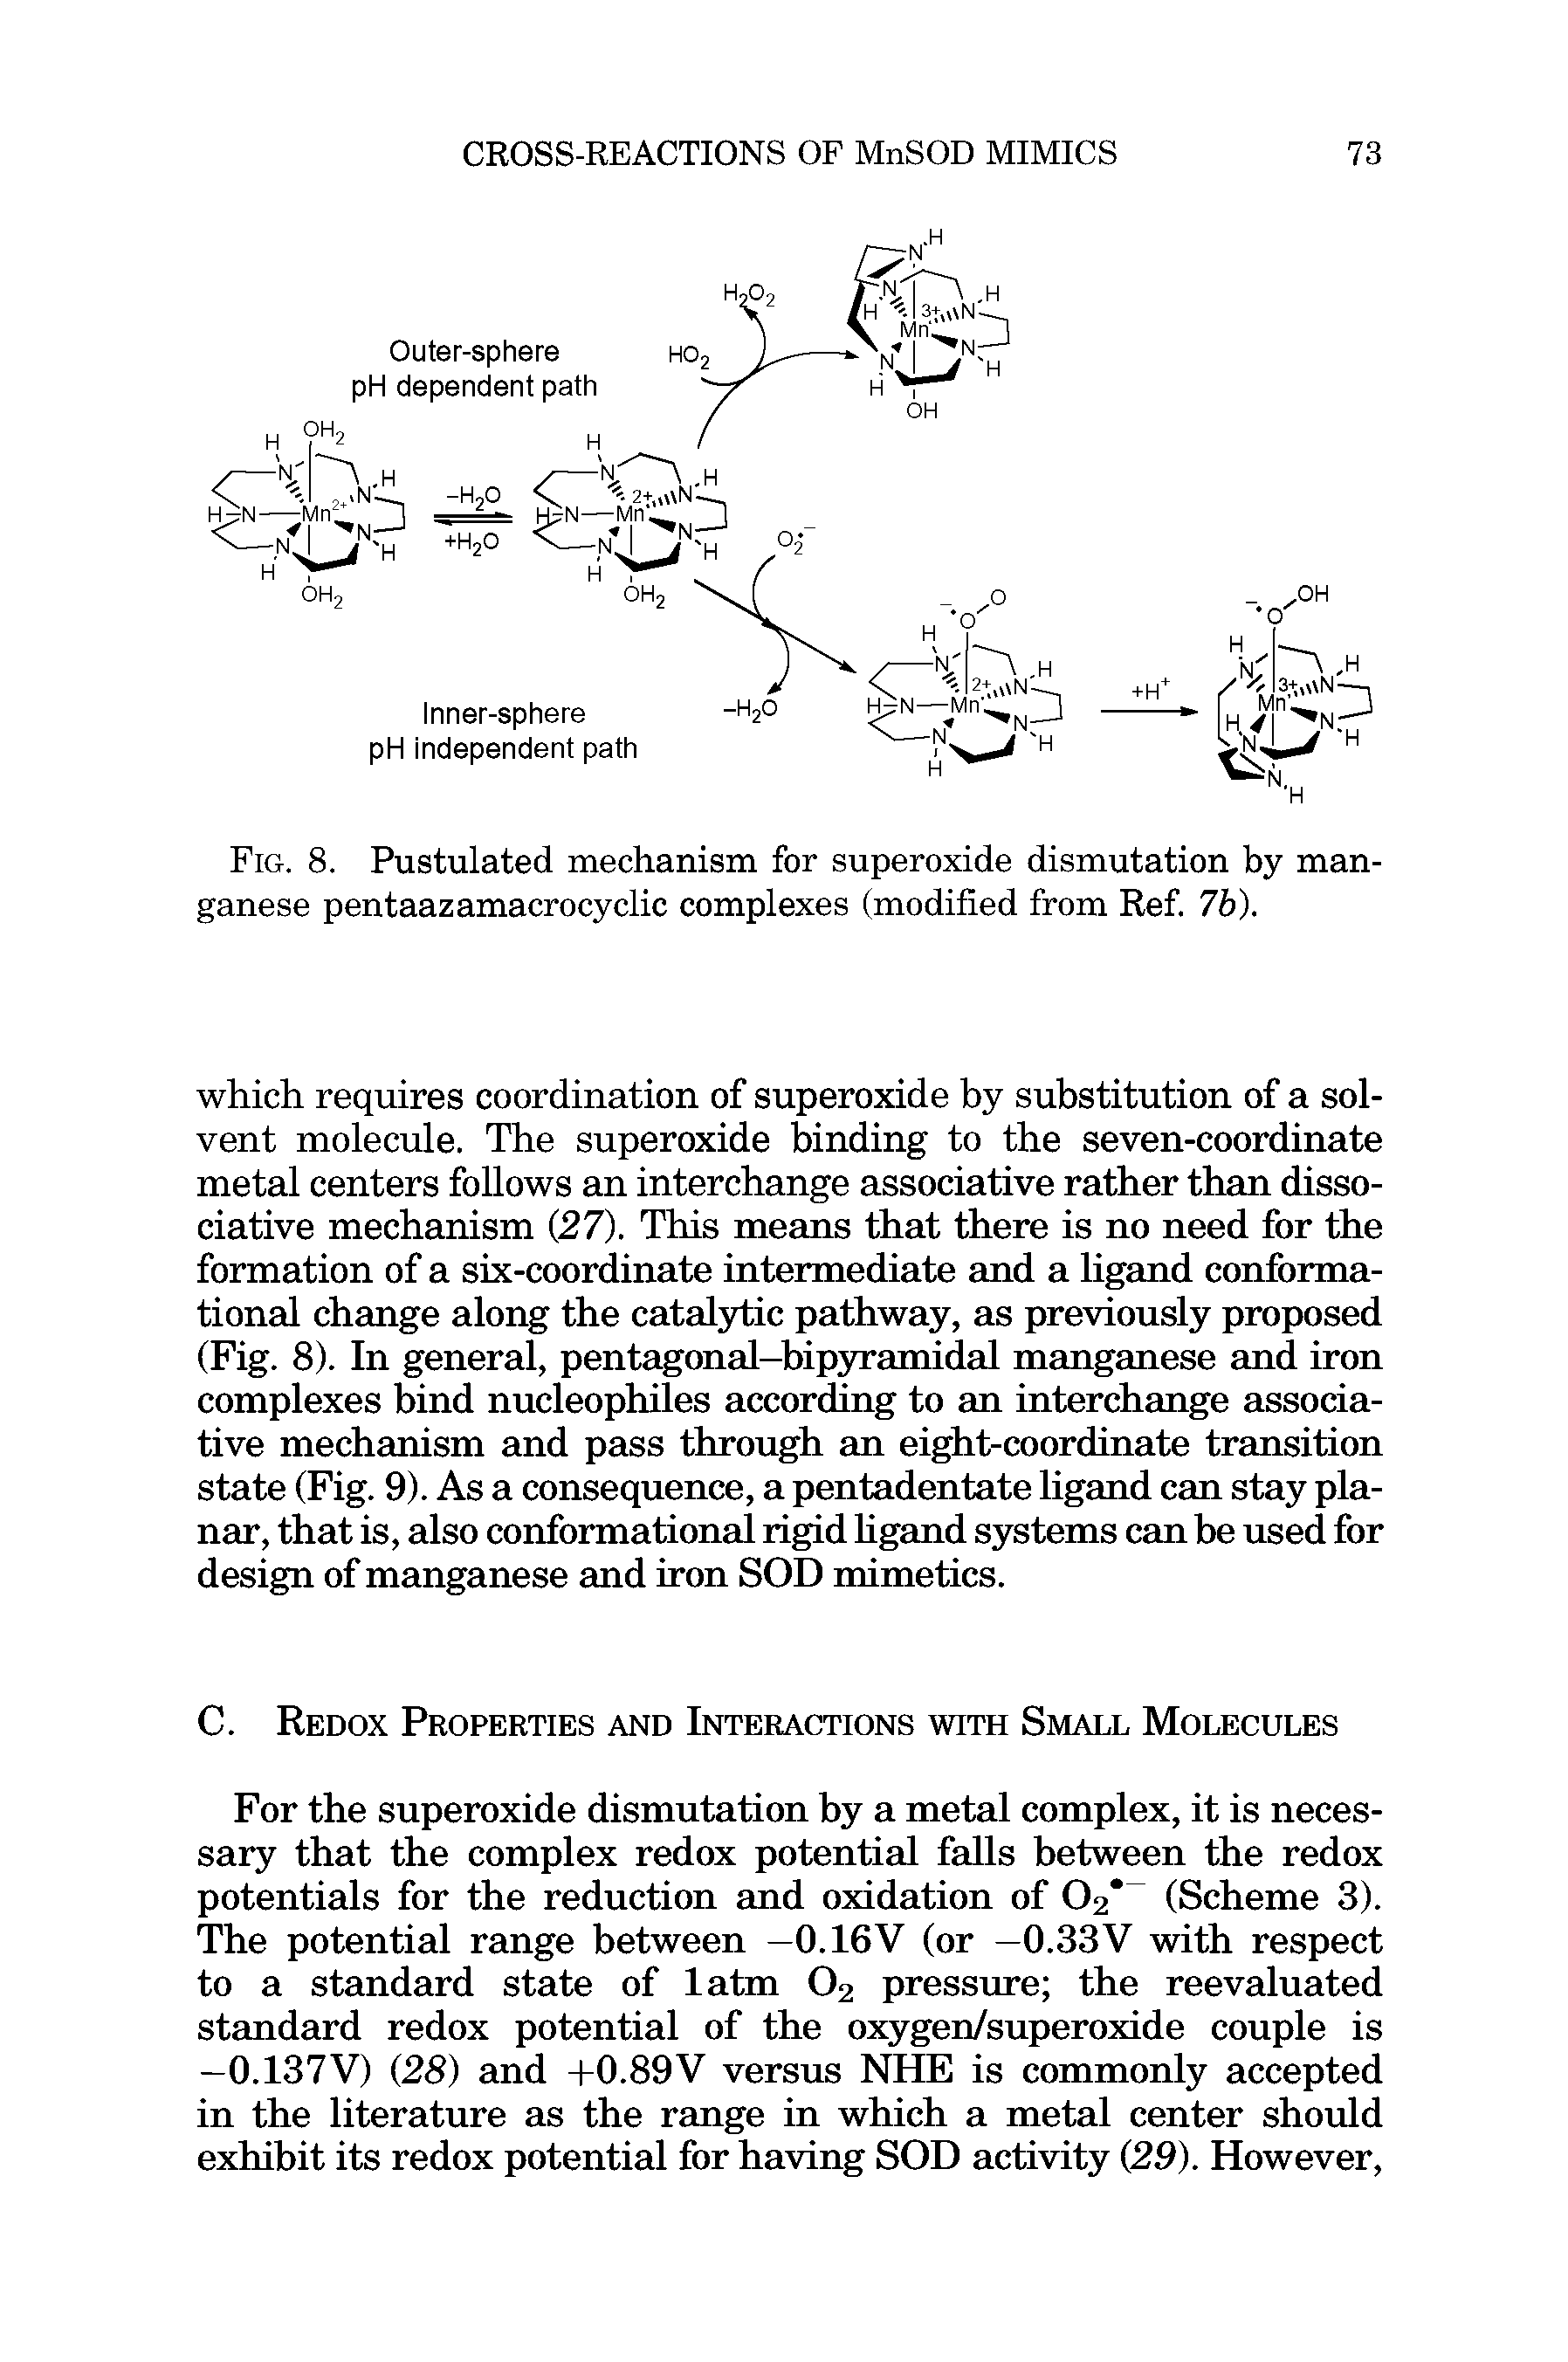 Fig. 8. Pustulated mechanism for superoxide dismutation by manganese pentaazamacrocyclic complexes (modified from Ref. 7b).